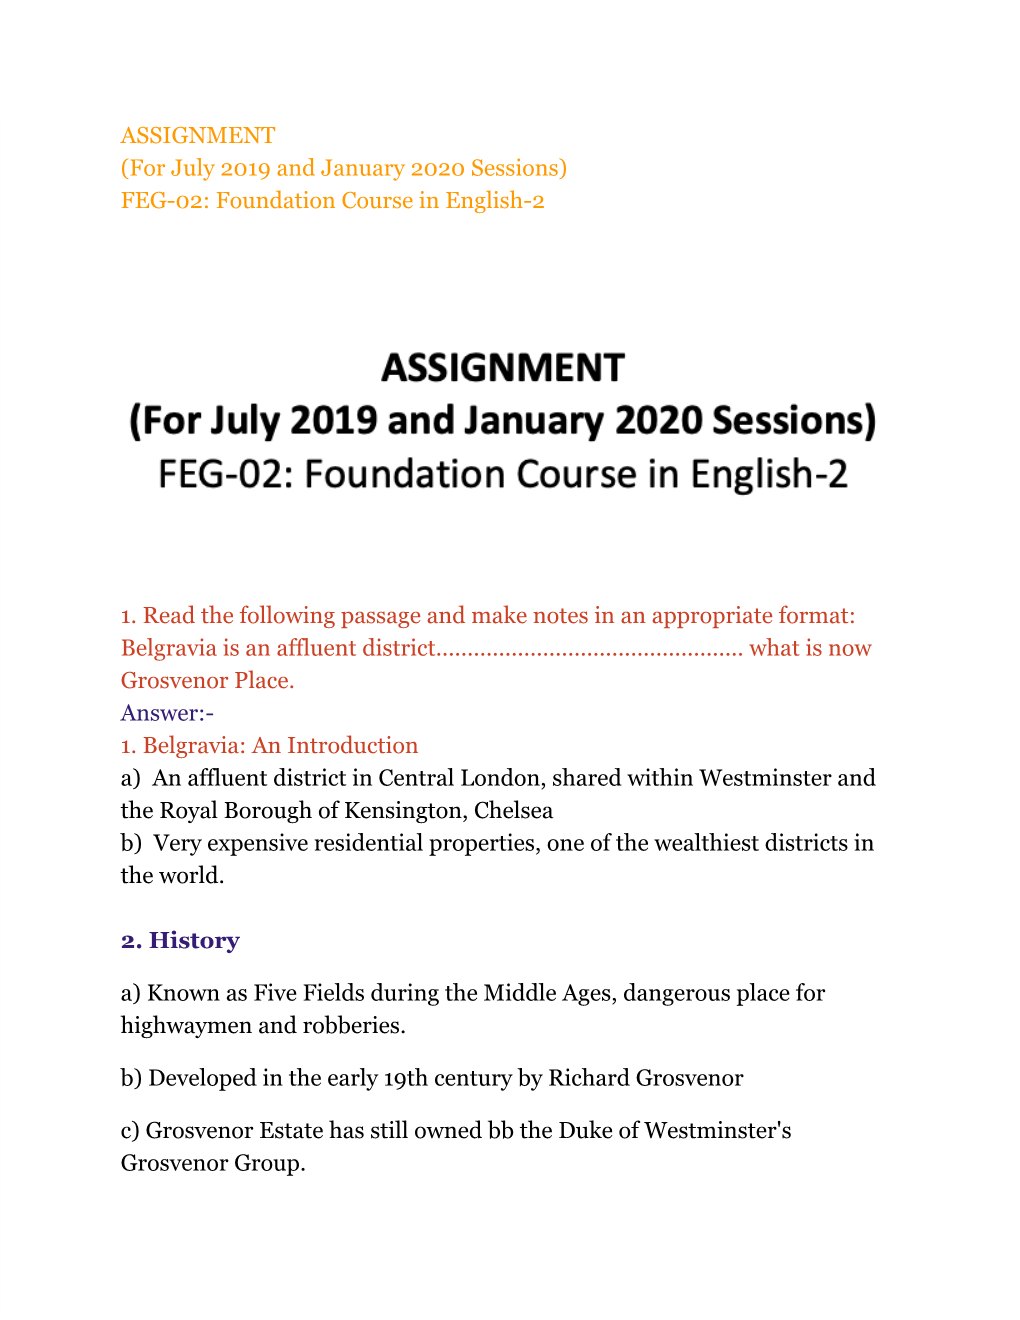 ASSIGNMENT (For July 2019 and January 2020 Sessions) FEG-02: Foundation Course in English-2